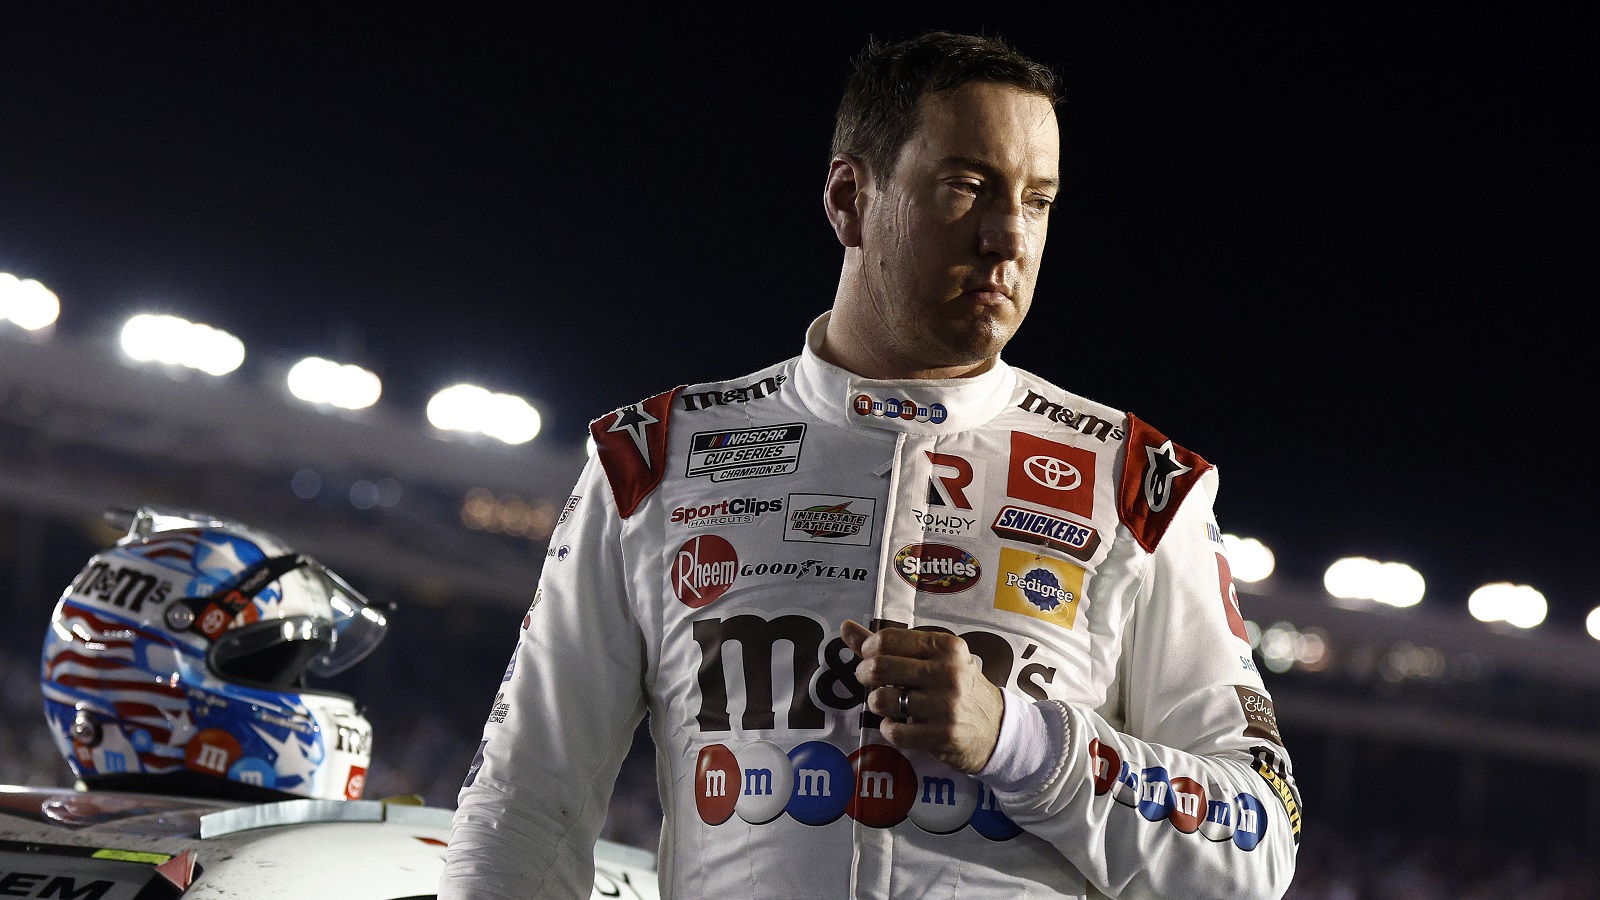 Kyle Busch, driver of the No. 18 Toyoya, exits his car after the NASCAR Cup Series Coca-Cola 600 at Charlotte Motor Speedway on May 29, 2022. | Jared C. Tilton/Getty Images